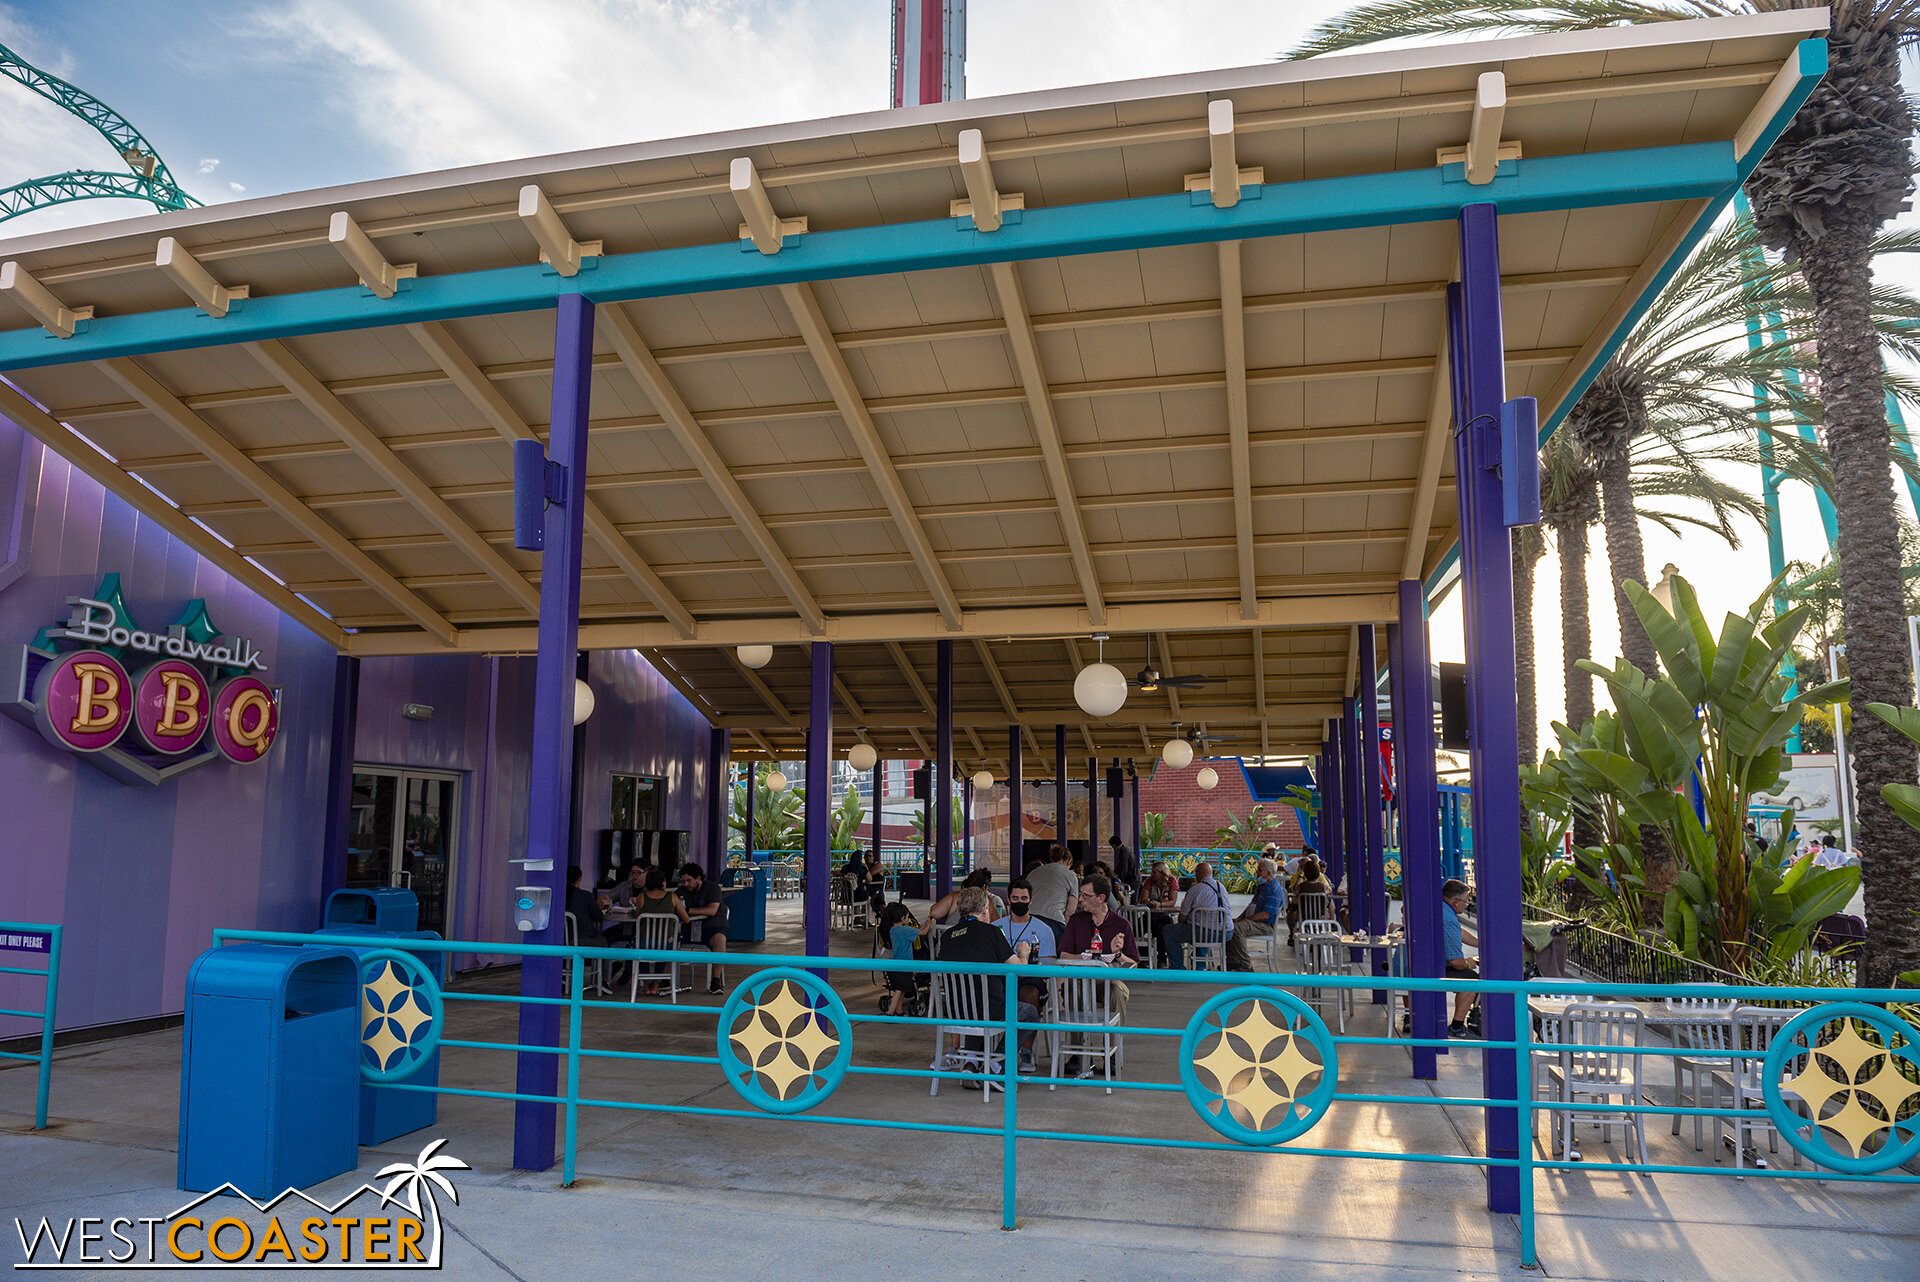  The indoor portion of the restaurant is not open, but the outdoor covered dining area is. 